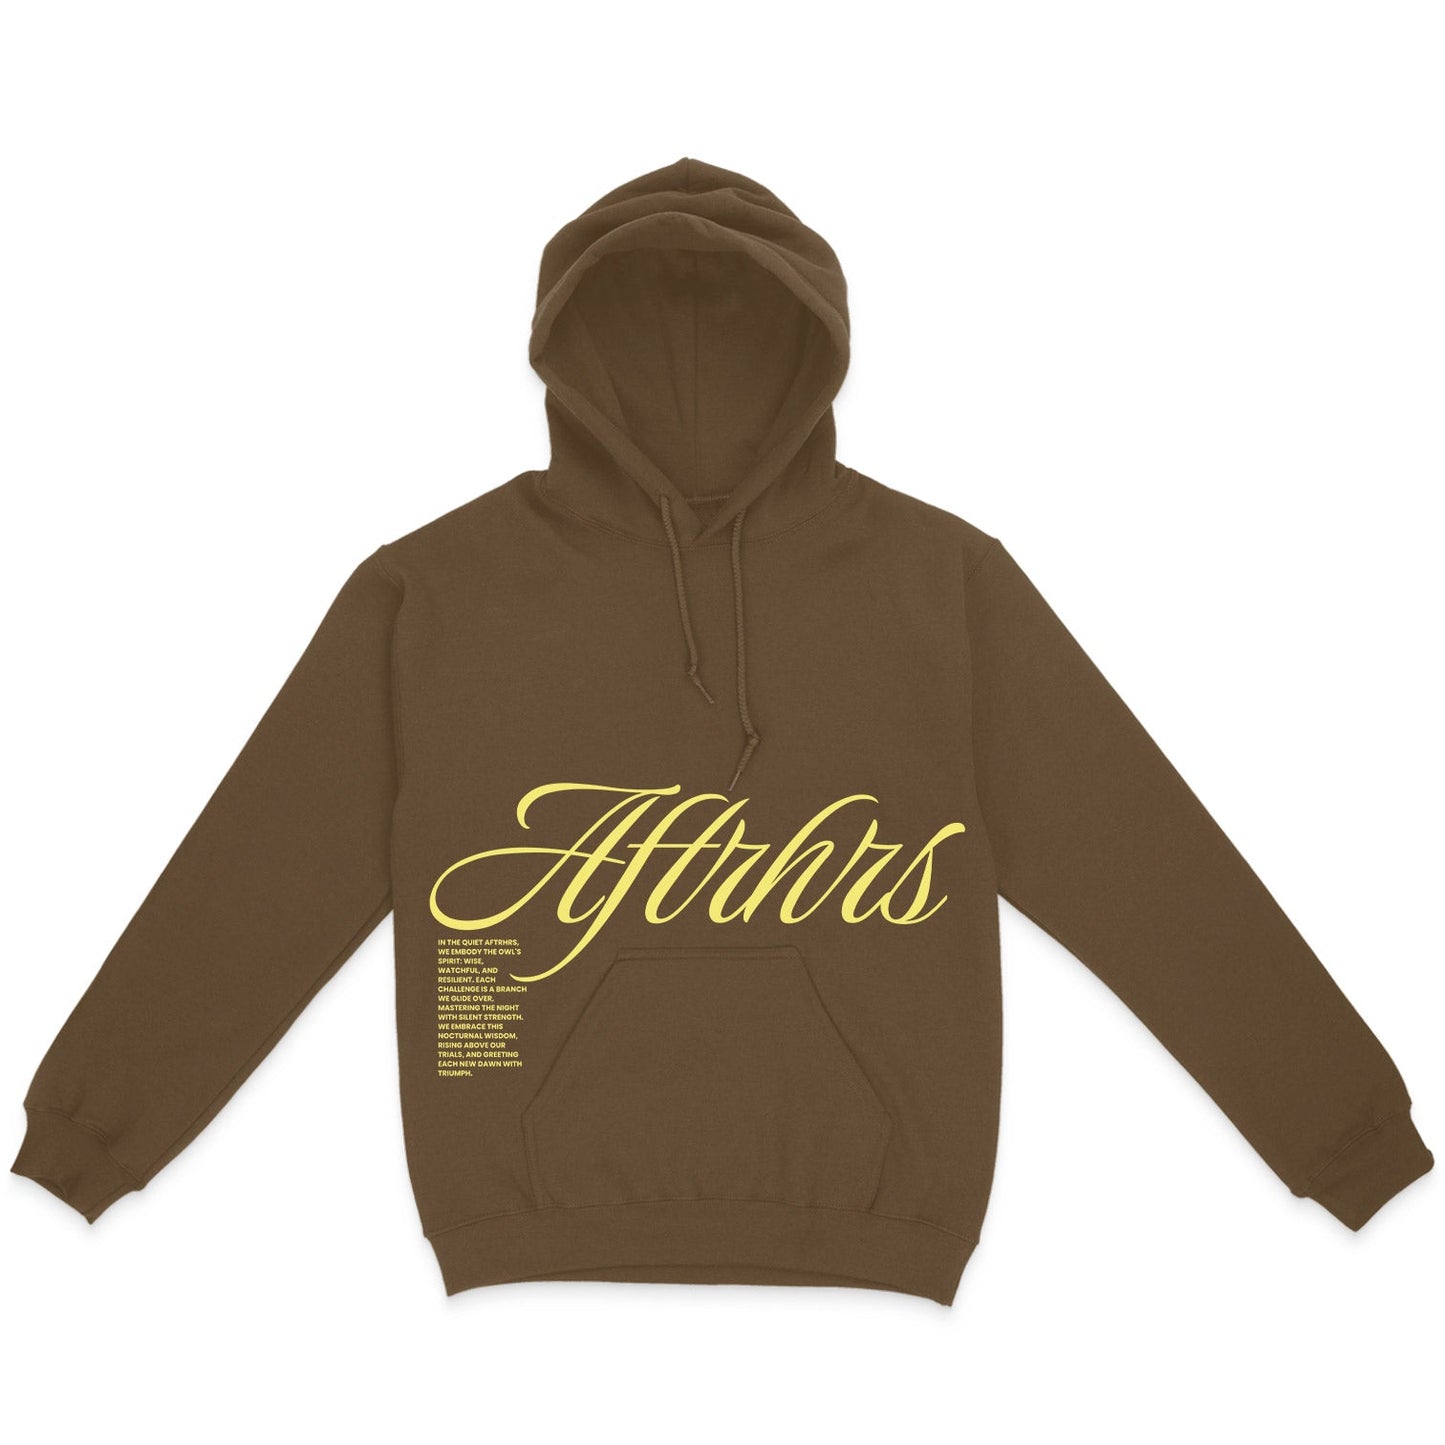 Rise Above Hoodie - Brown / Cream - FREE w/ Purchase of 2 Hoodies